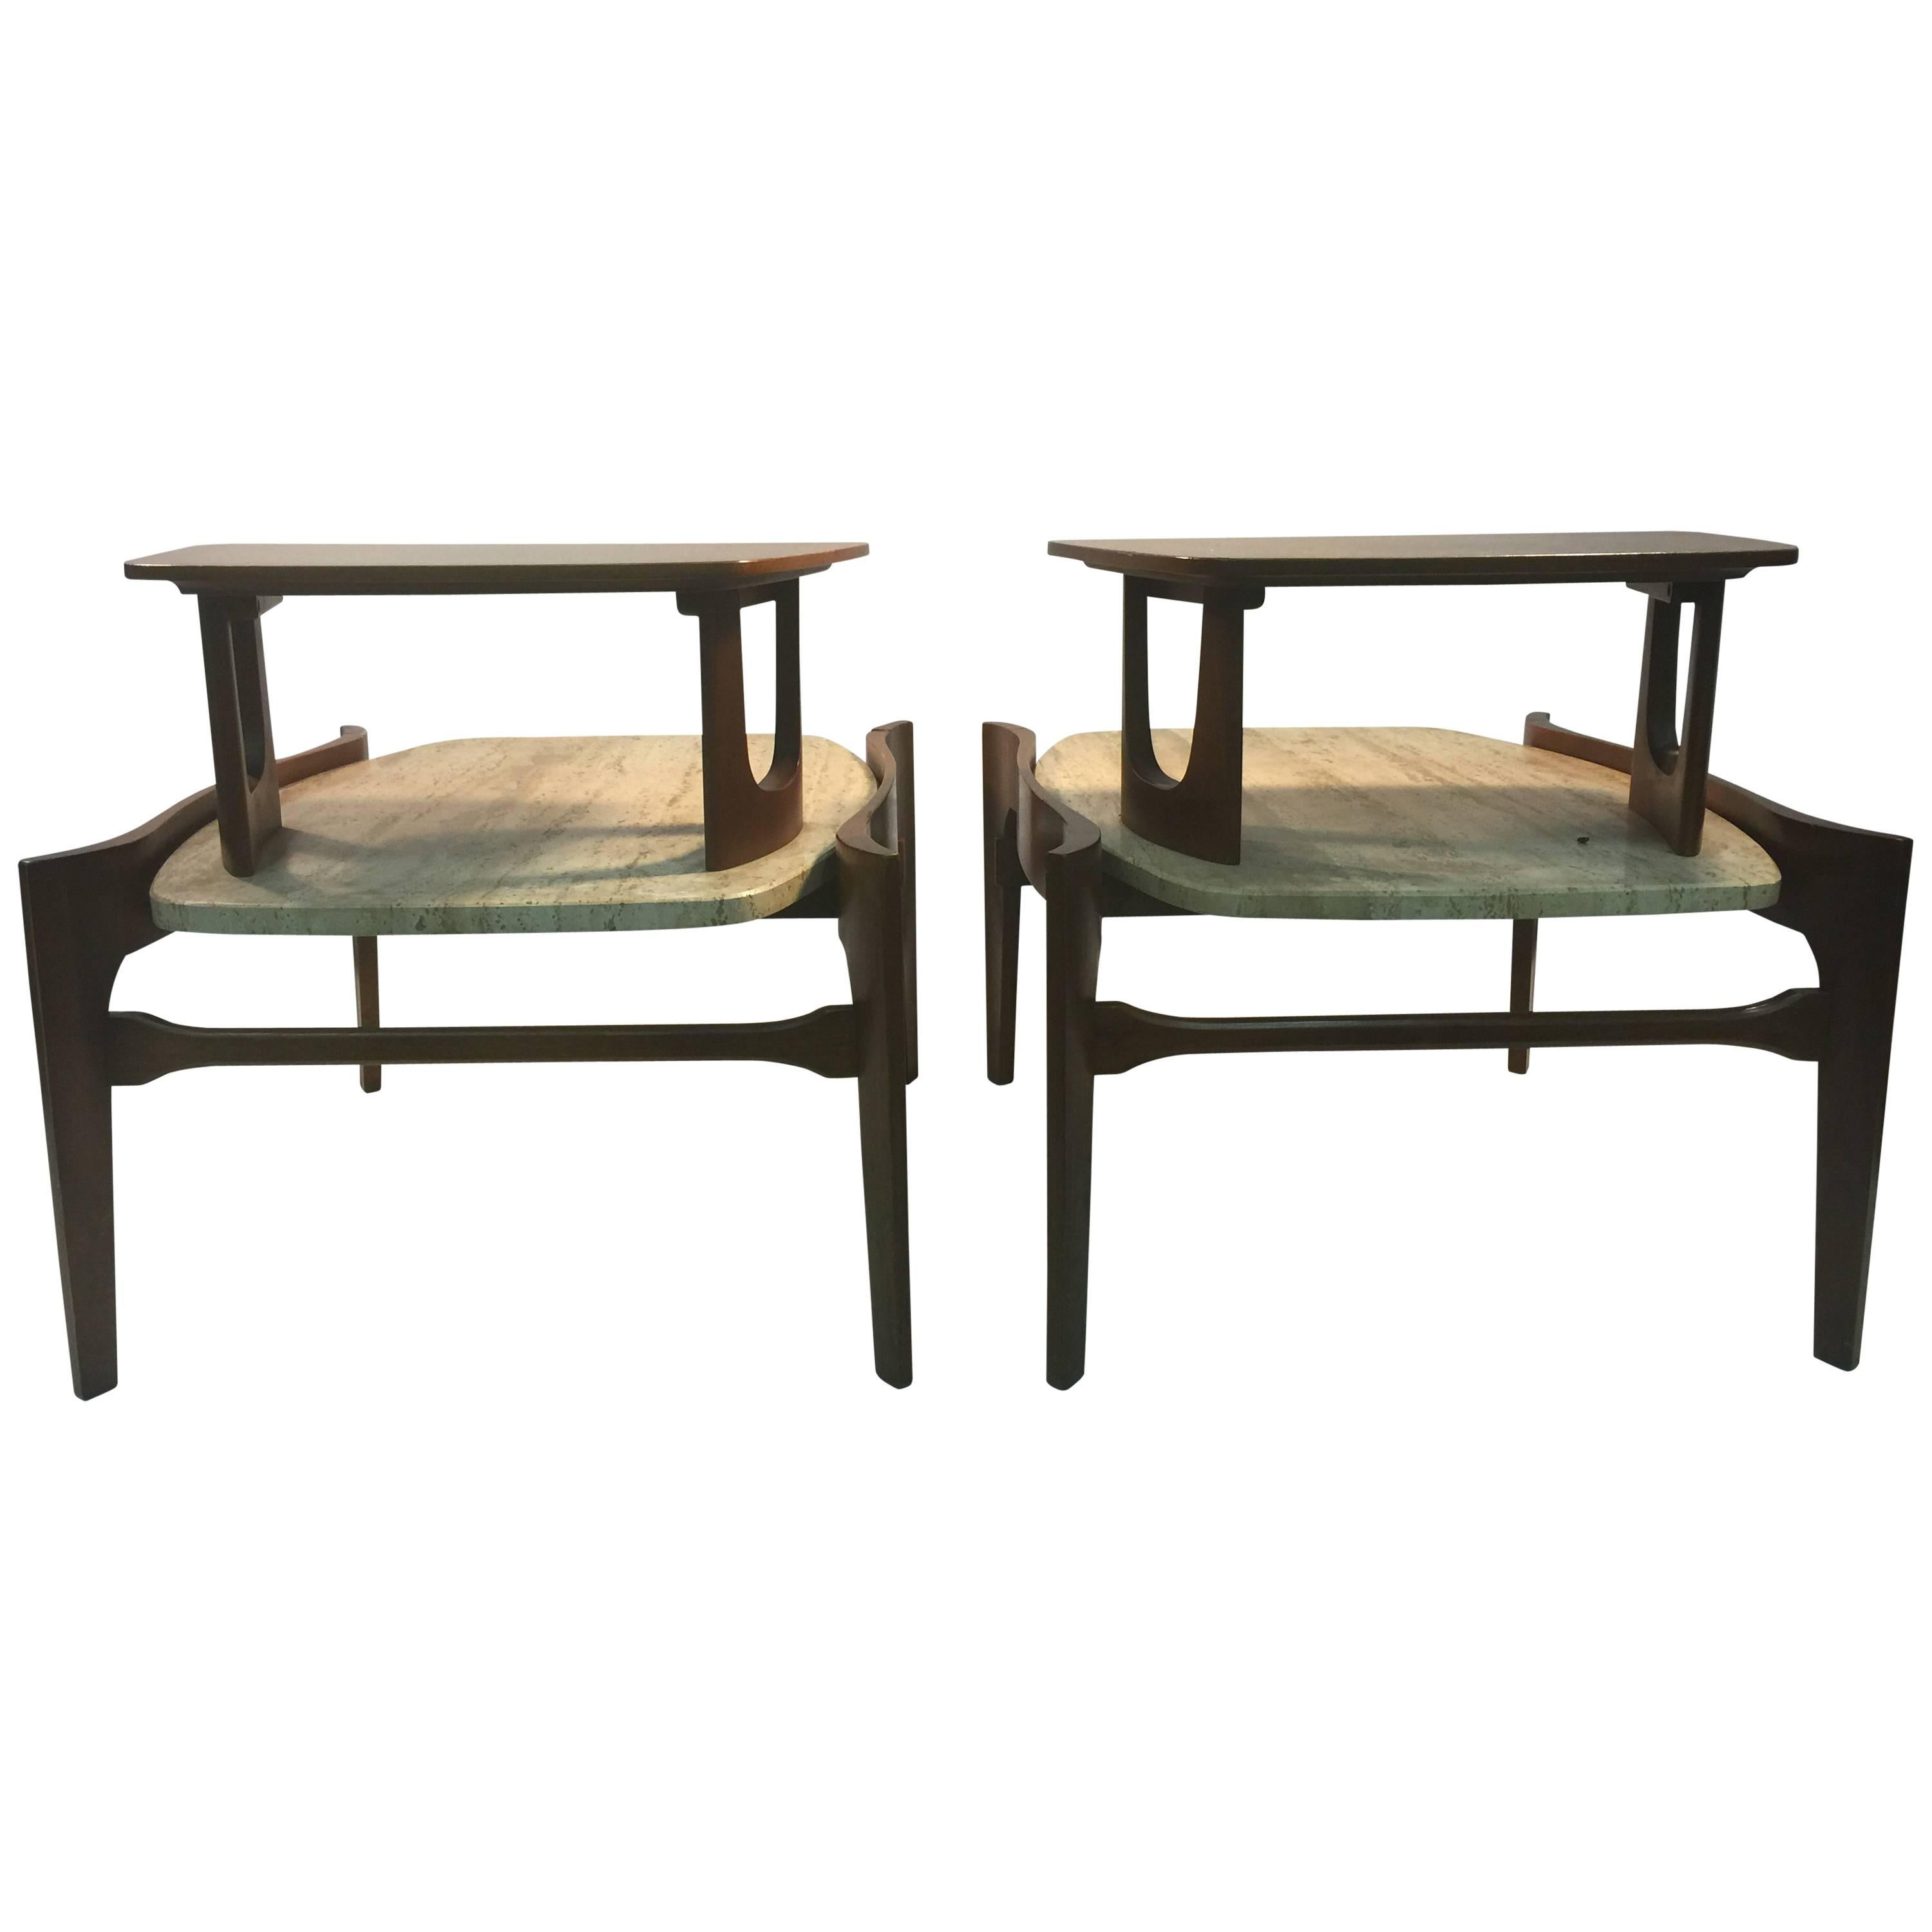 Exceptional Pair of Italian Wood and Travertine Two-Tier Side Tables For Sale